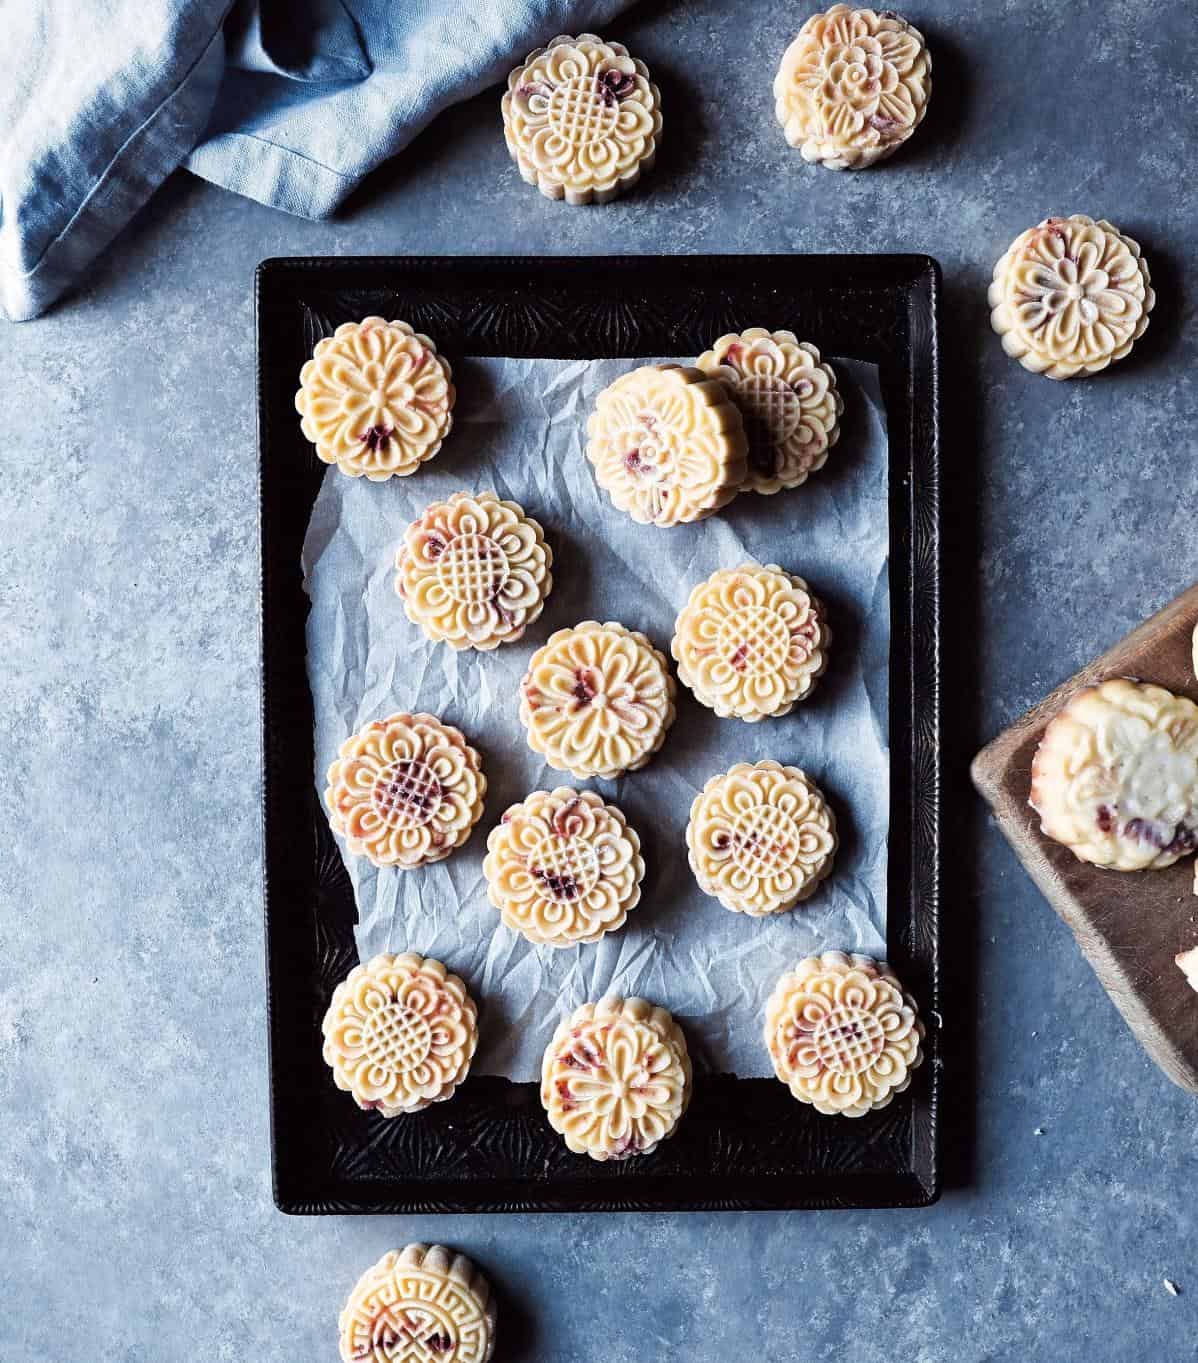  These cranberry mooncake cookies deliver an explosion of flavor in every bite!